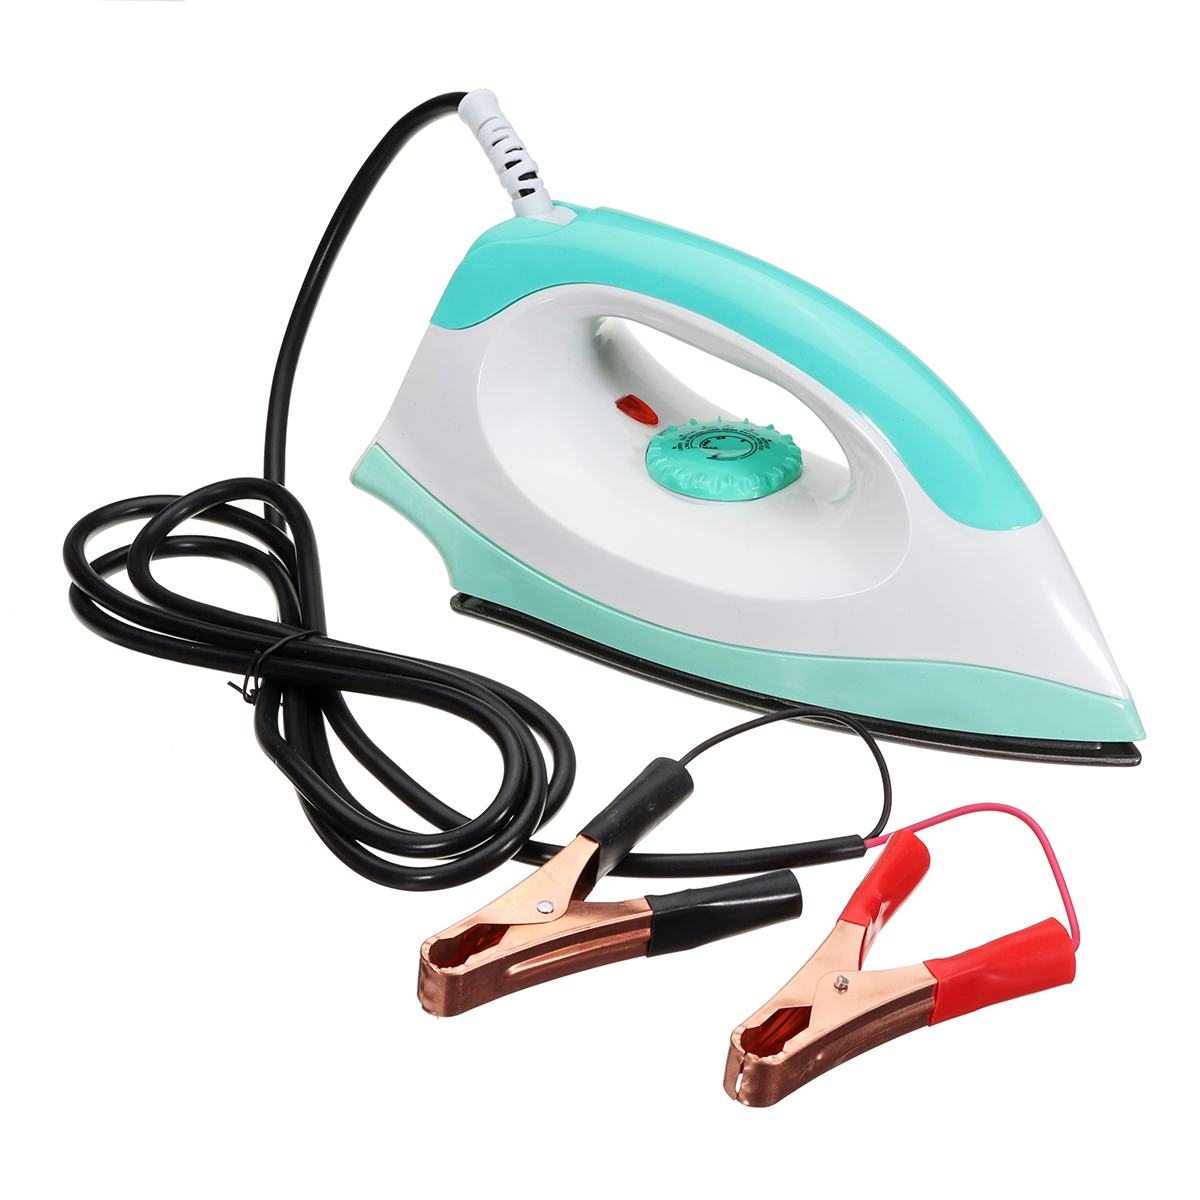 150W-DC12V-Mini-Electric-Iron-Portable-Clothes-Dry-Handheld-Steamer-Steam-Irons-Travel-Equipment-1347808-8